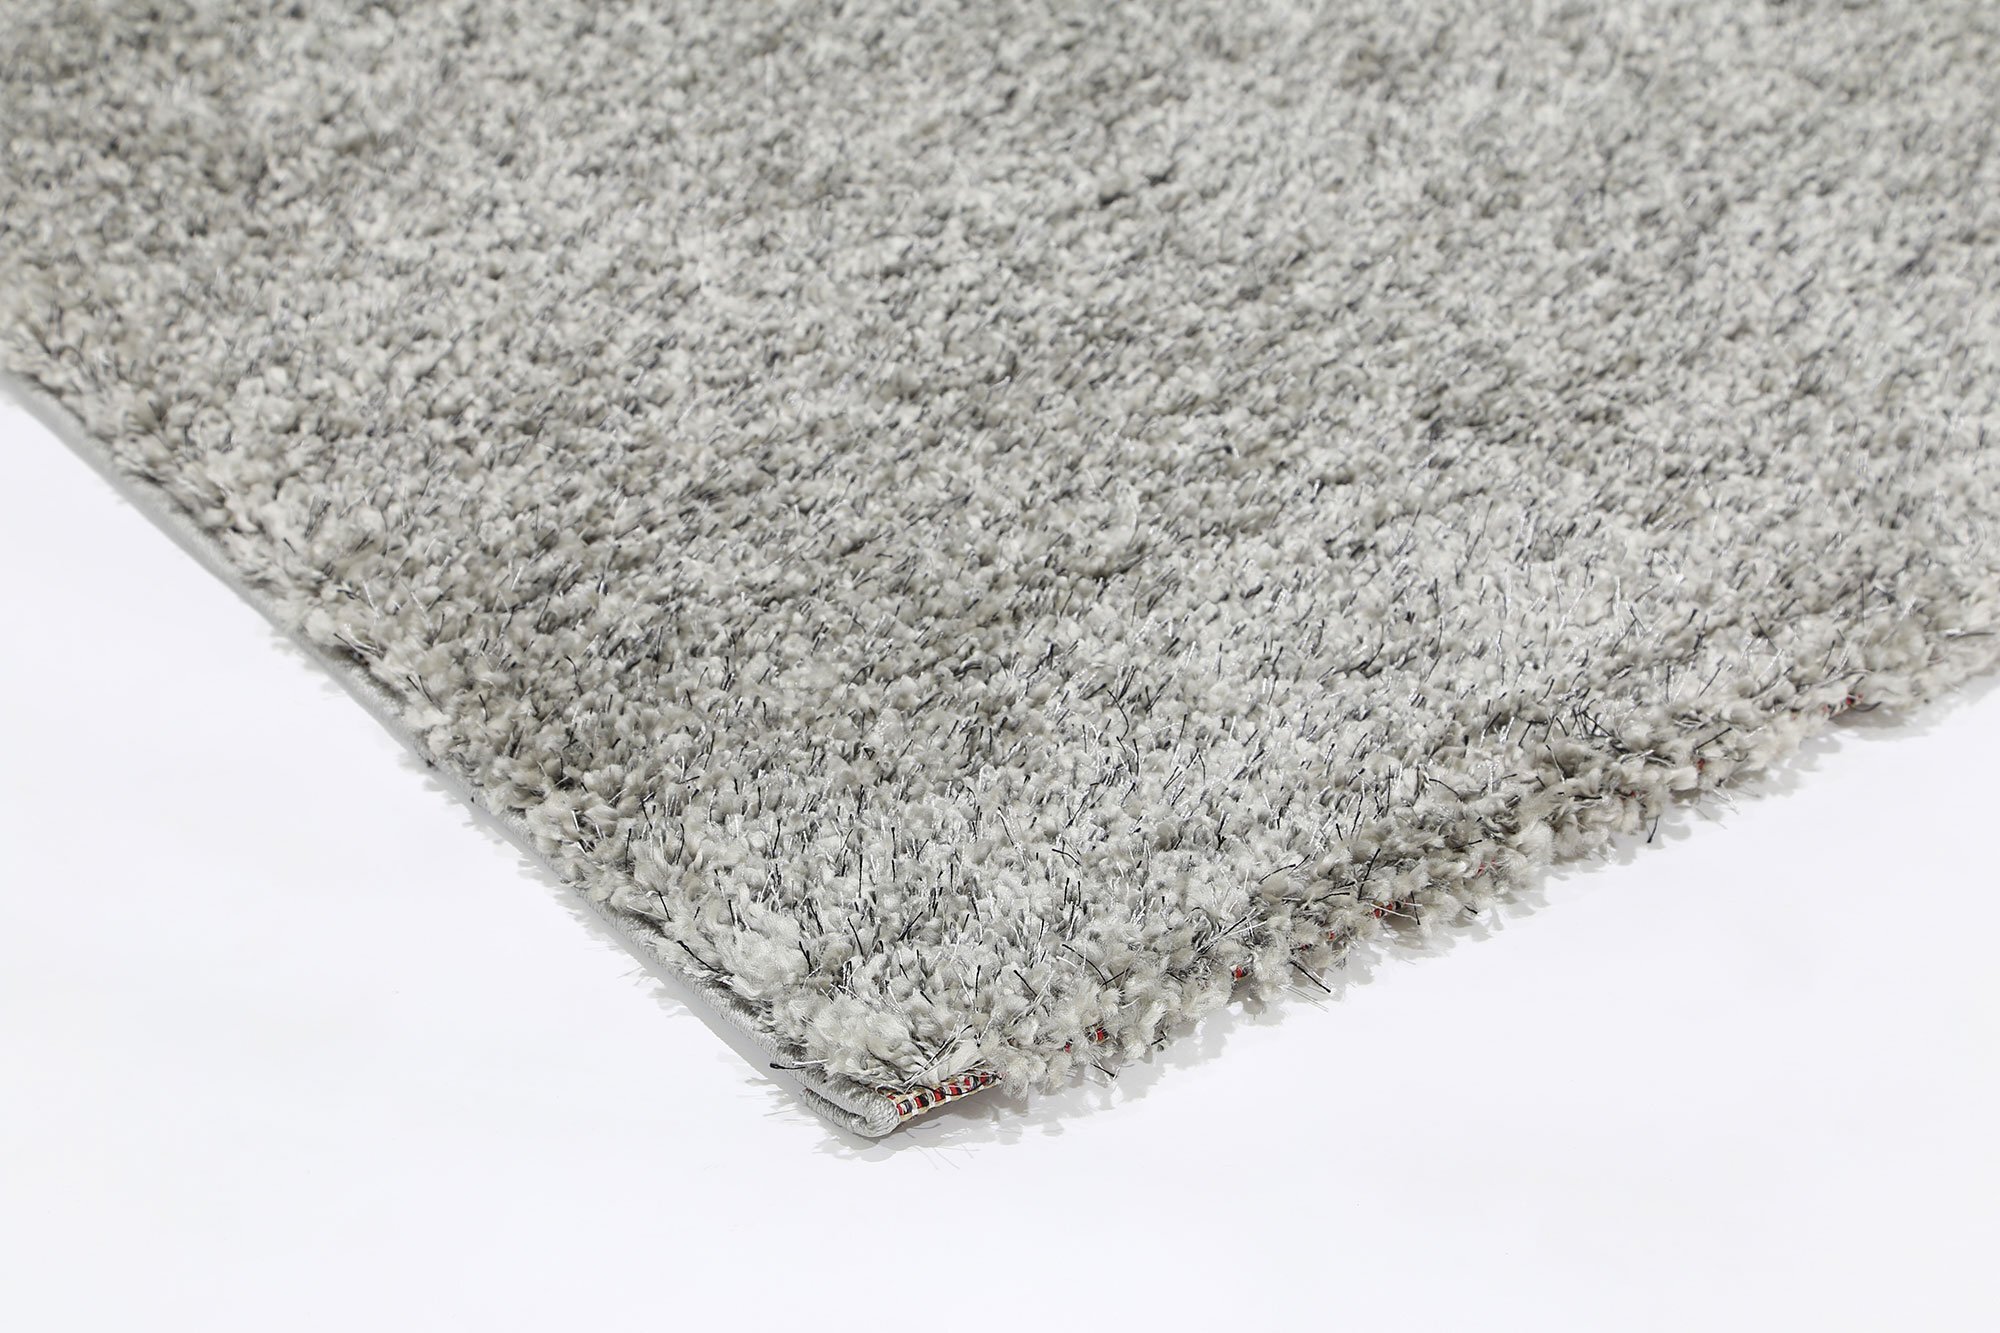 Lusso Thick Plain Grey Shaggy Rug